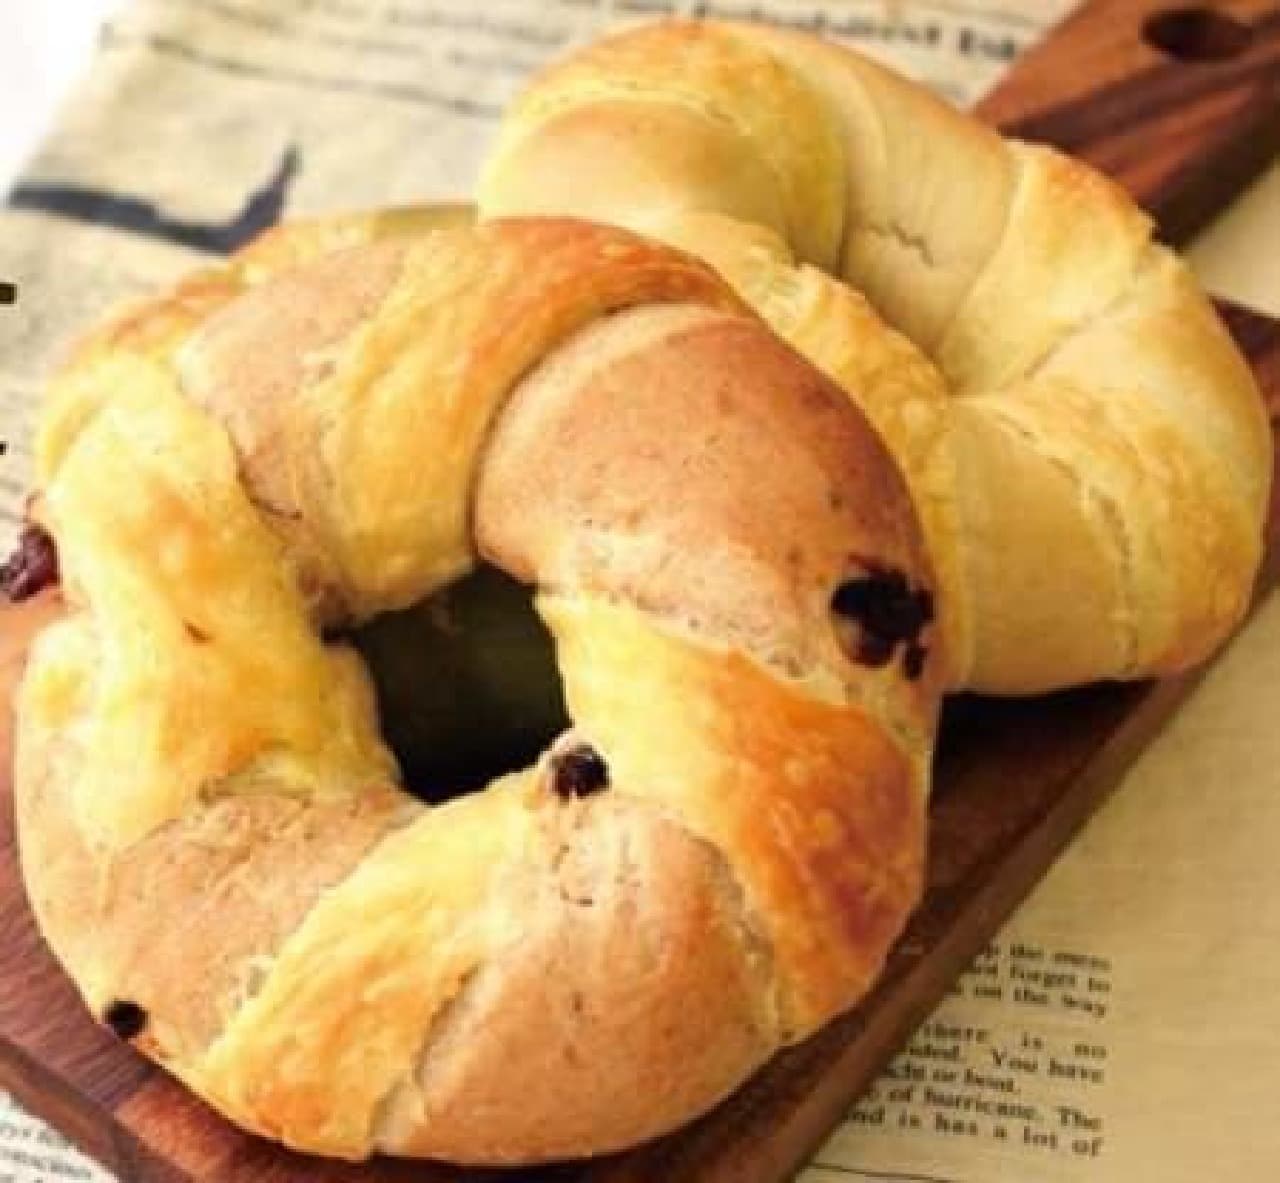 Handmade one by one! "Croissant bagel", a bagel specialty store